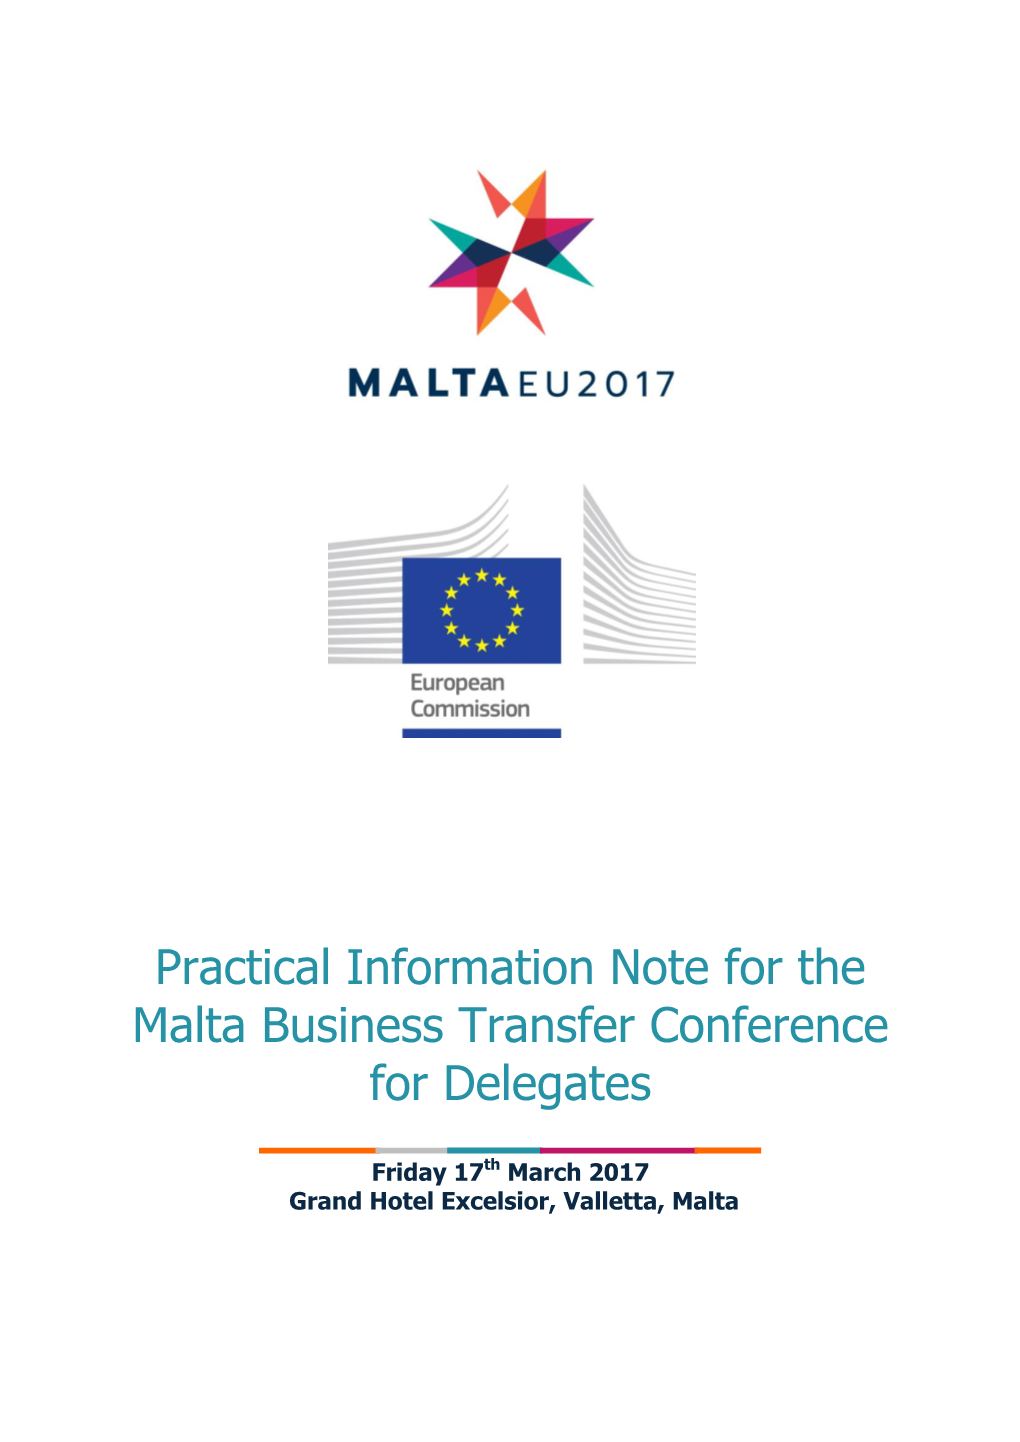 Practical Information Note for the Malta Business Transfer Conference for Delegates